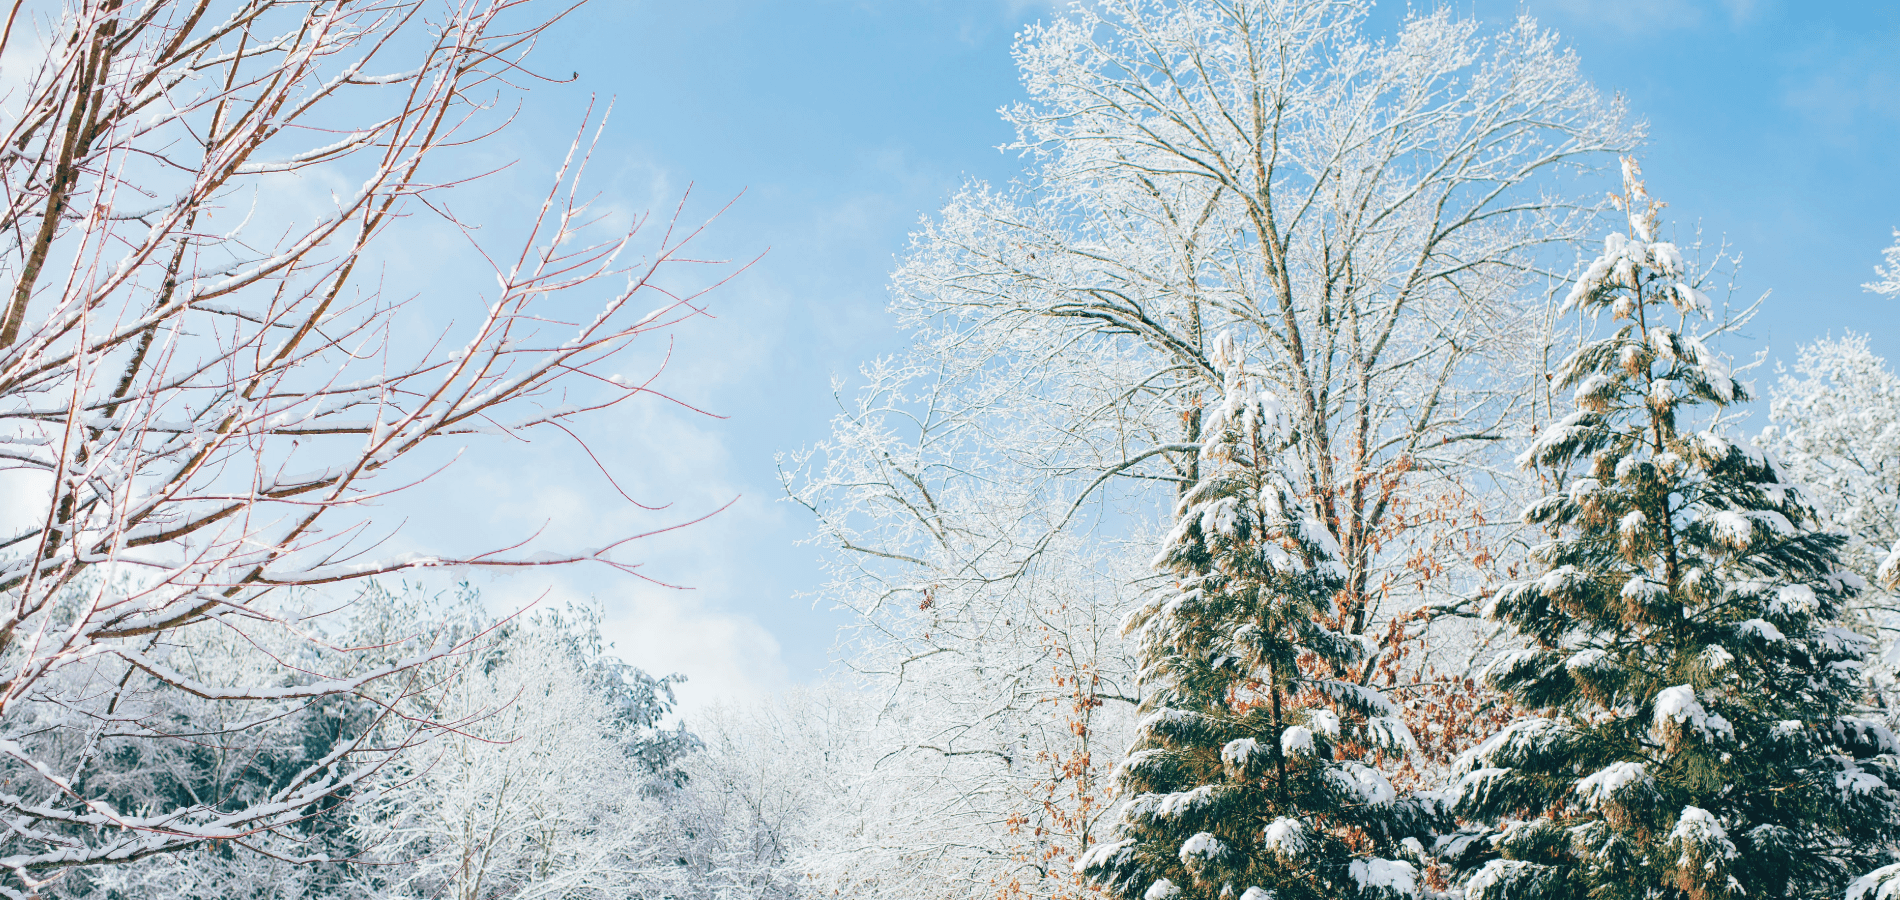 photo of snowy trees in winter